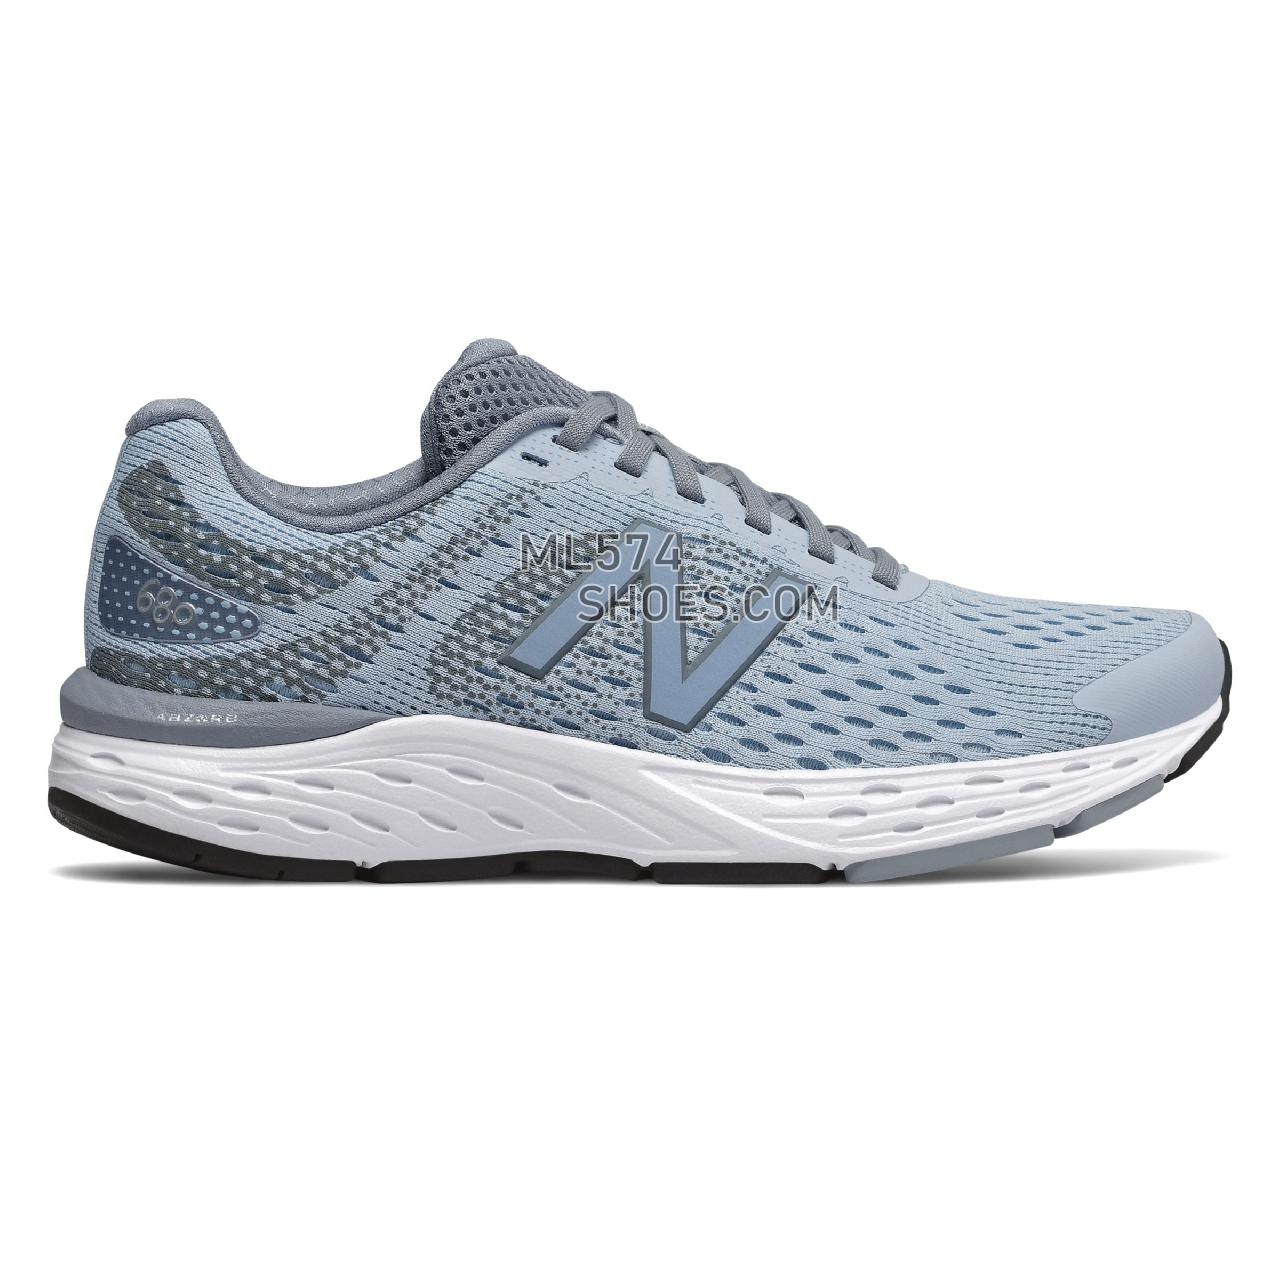 New Balance 680v6 - Women's Classic Sneakers - Air with Reflection - W680LA6